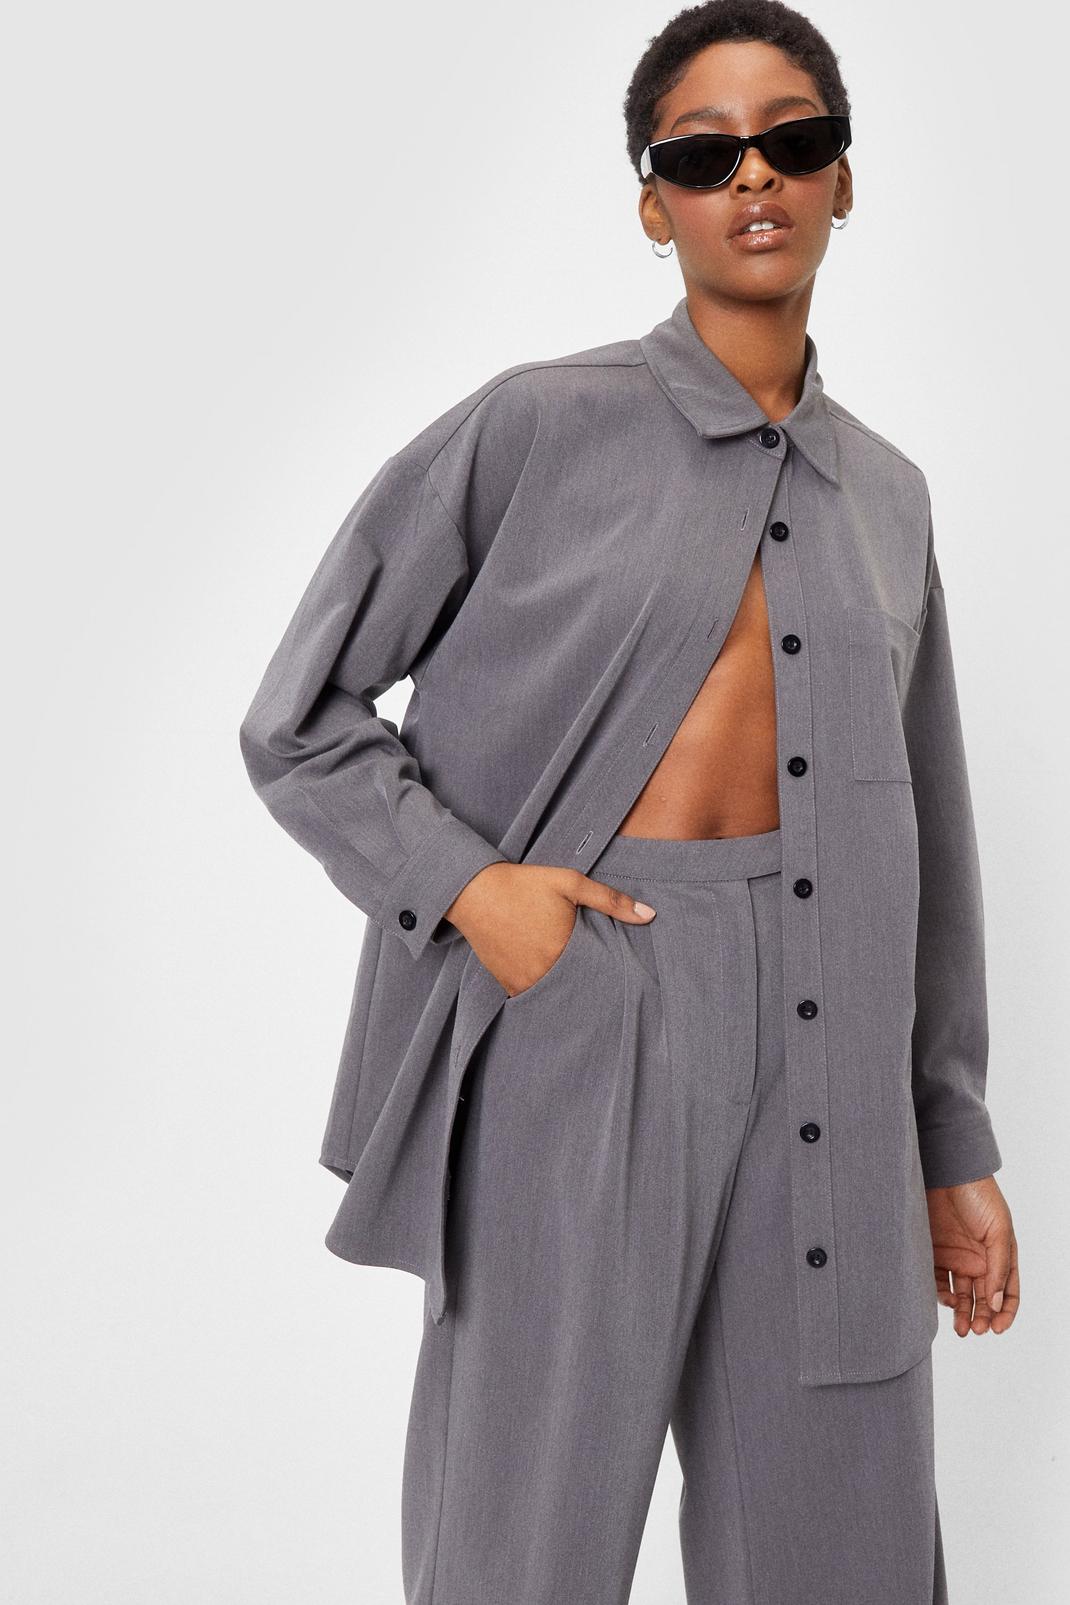 Grey Whatever Suits You Oversized Button-Down Shirt image number 1